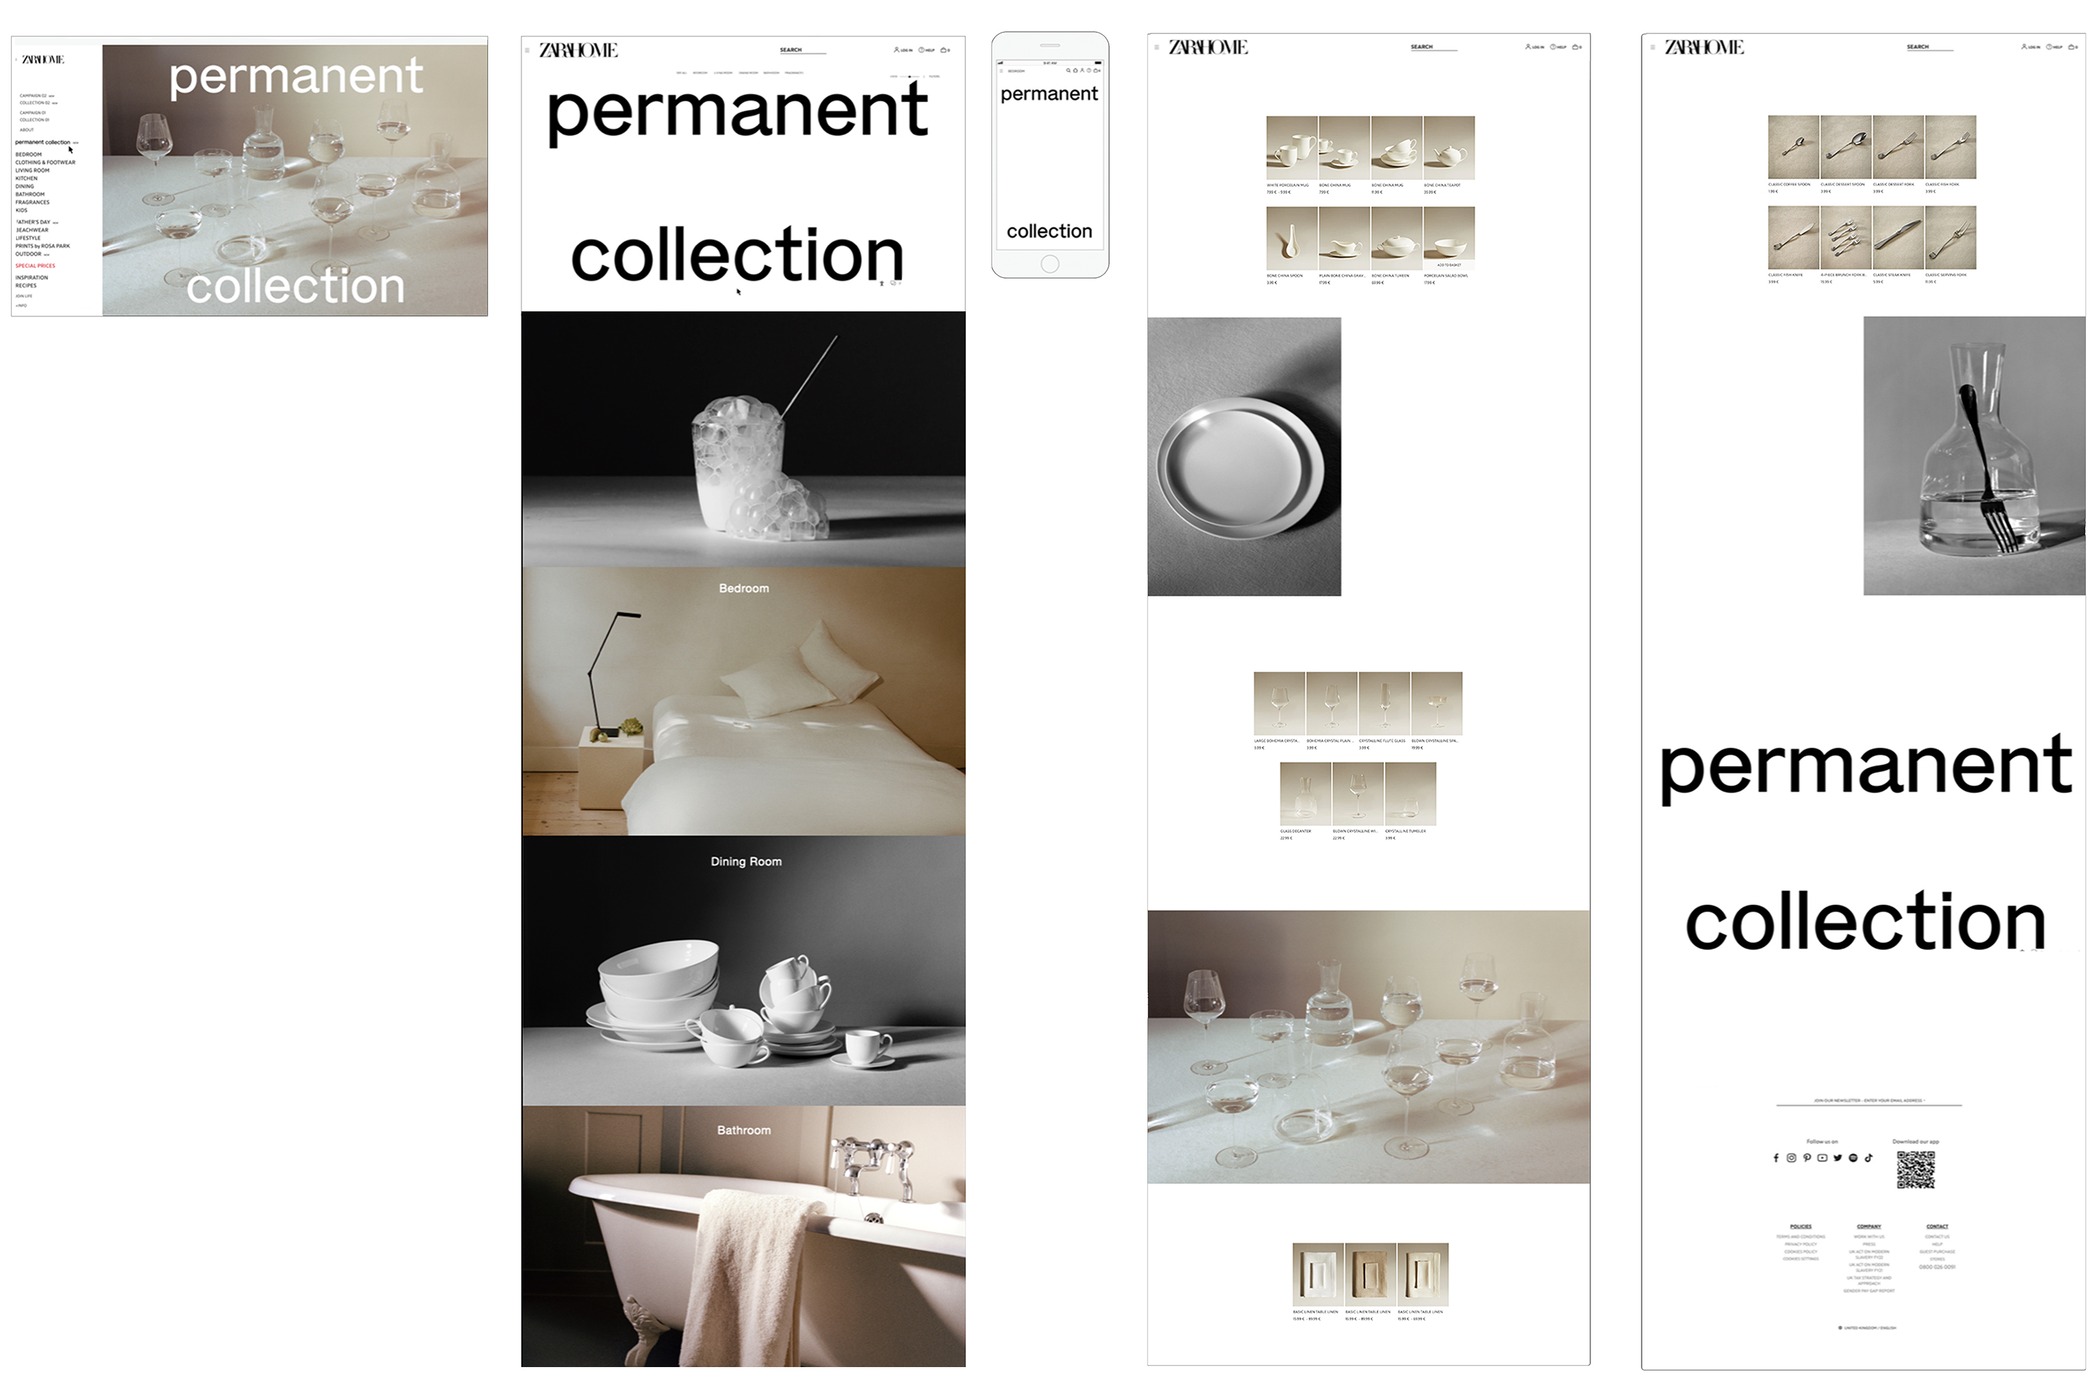 Creative direction & strategy for Zara Home micro-site